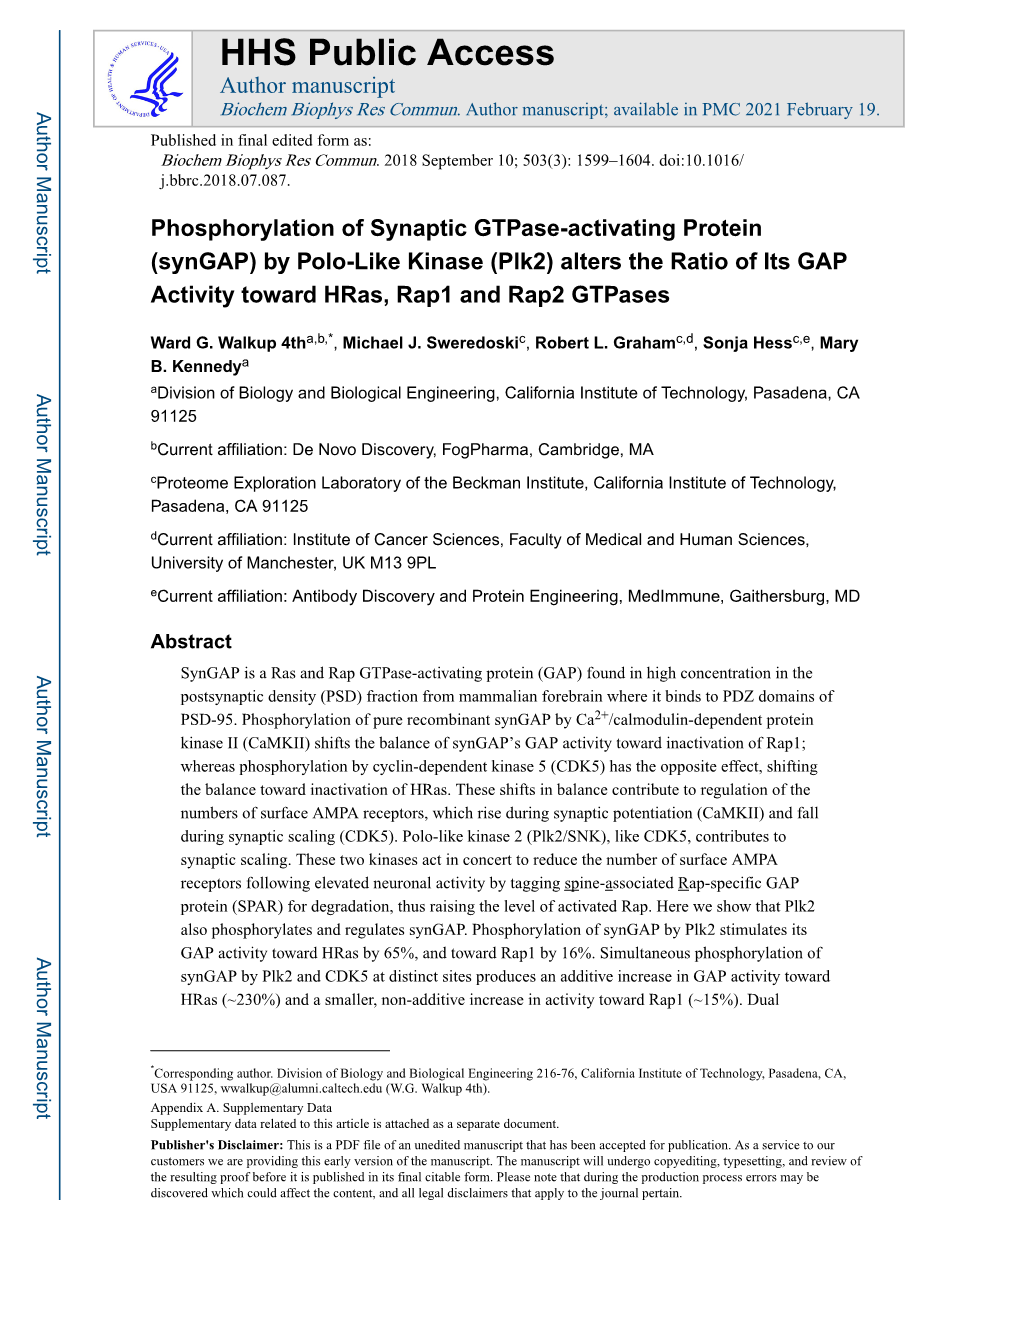 Phosphorylation of Synaptic Gtpase-Activating Protein (Syngap) by Polo-Like Kinase (Plk2) Alters the Ratio of Its GAP Activity Toward Hras, Rap1 and Rap2 Gtpases